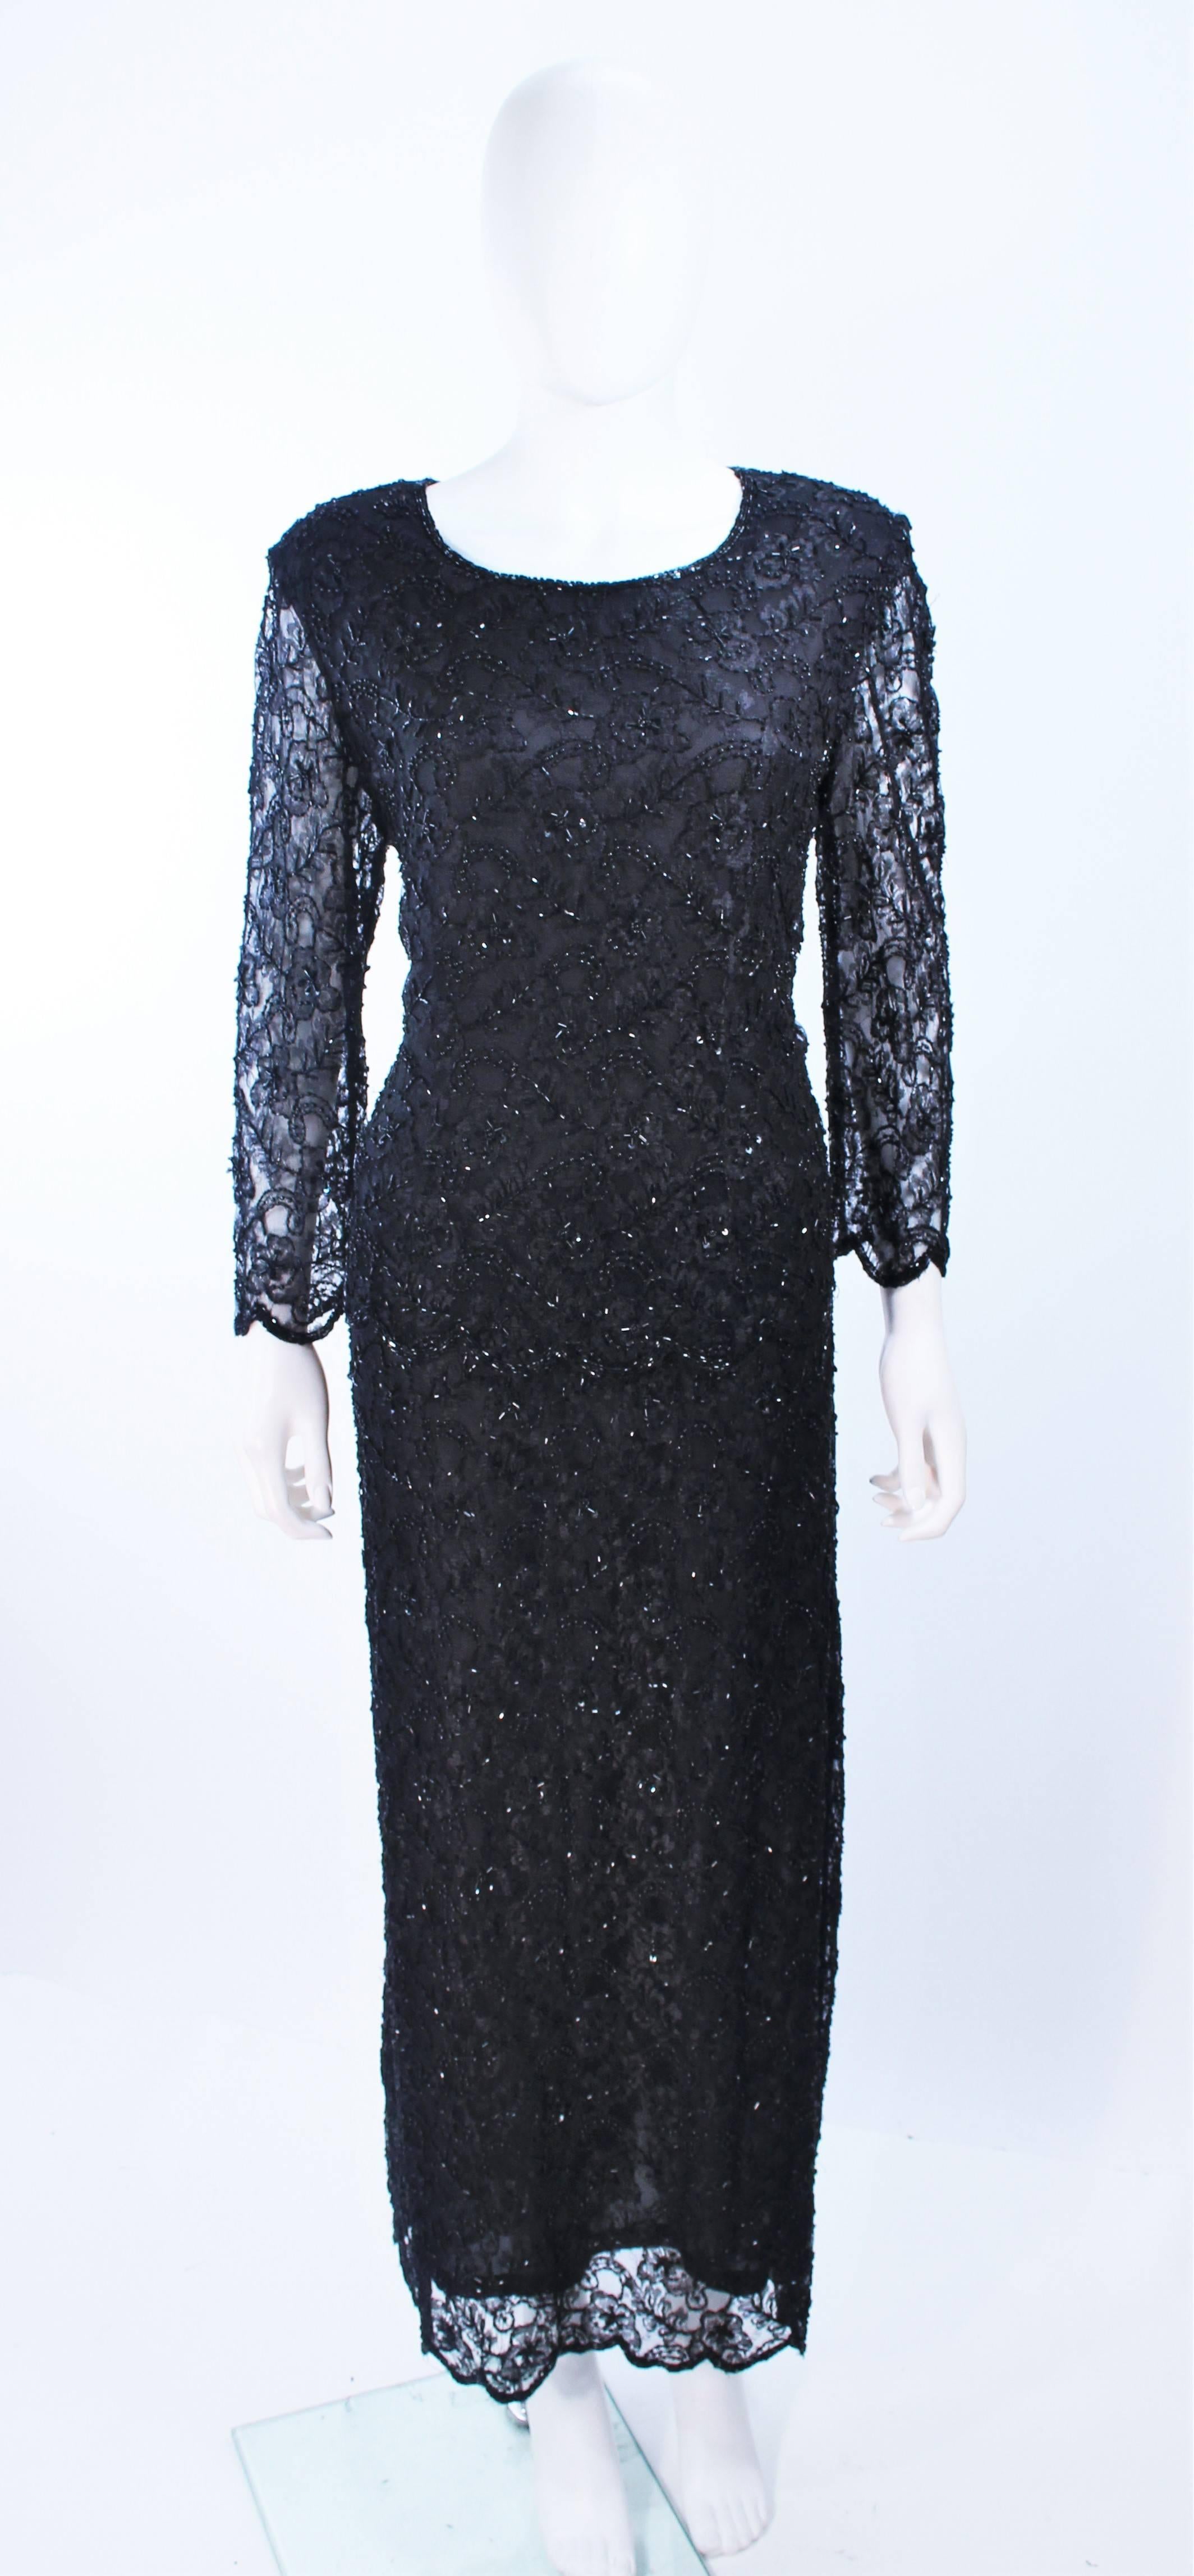 This Frank Usher gown is composed of a beaded lace. Features sheer sleeves with a scallop edge neckline. There is a zipper closure. In excellent vintage condition.

**Please cross-reference measurements for personal accuracy. Size in description